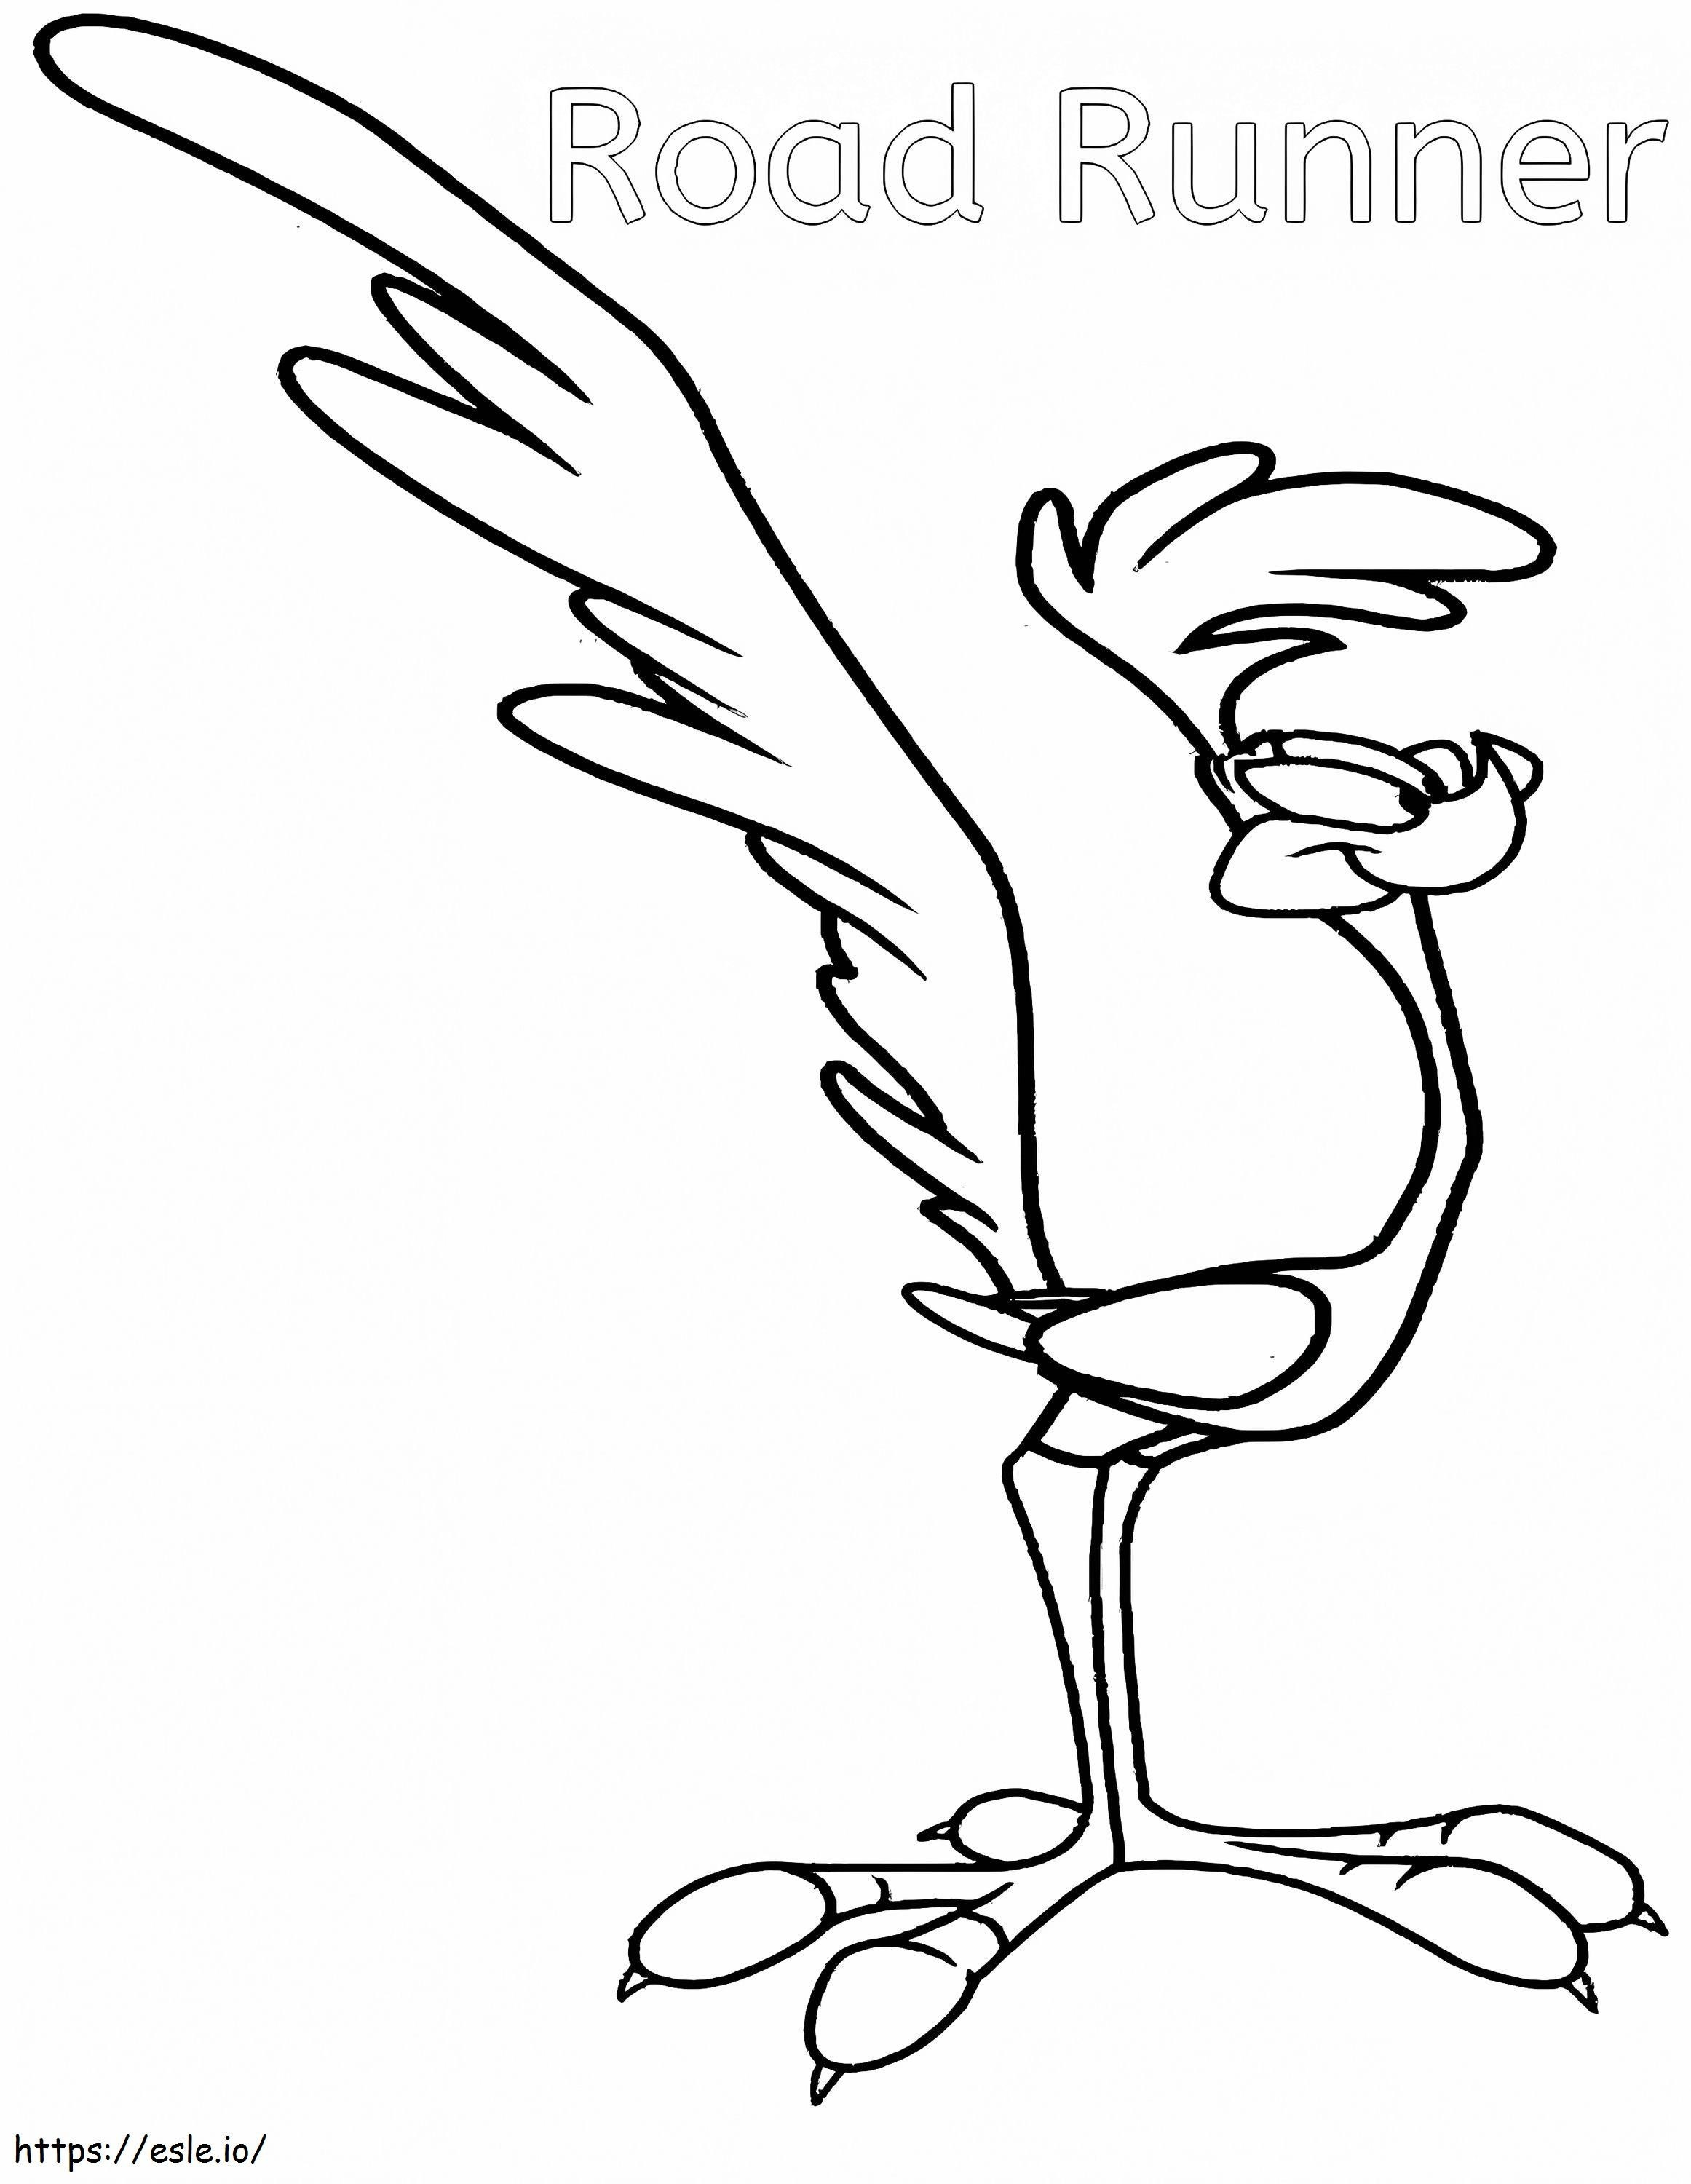 Road Runner coloring page